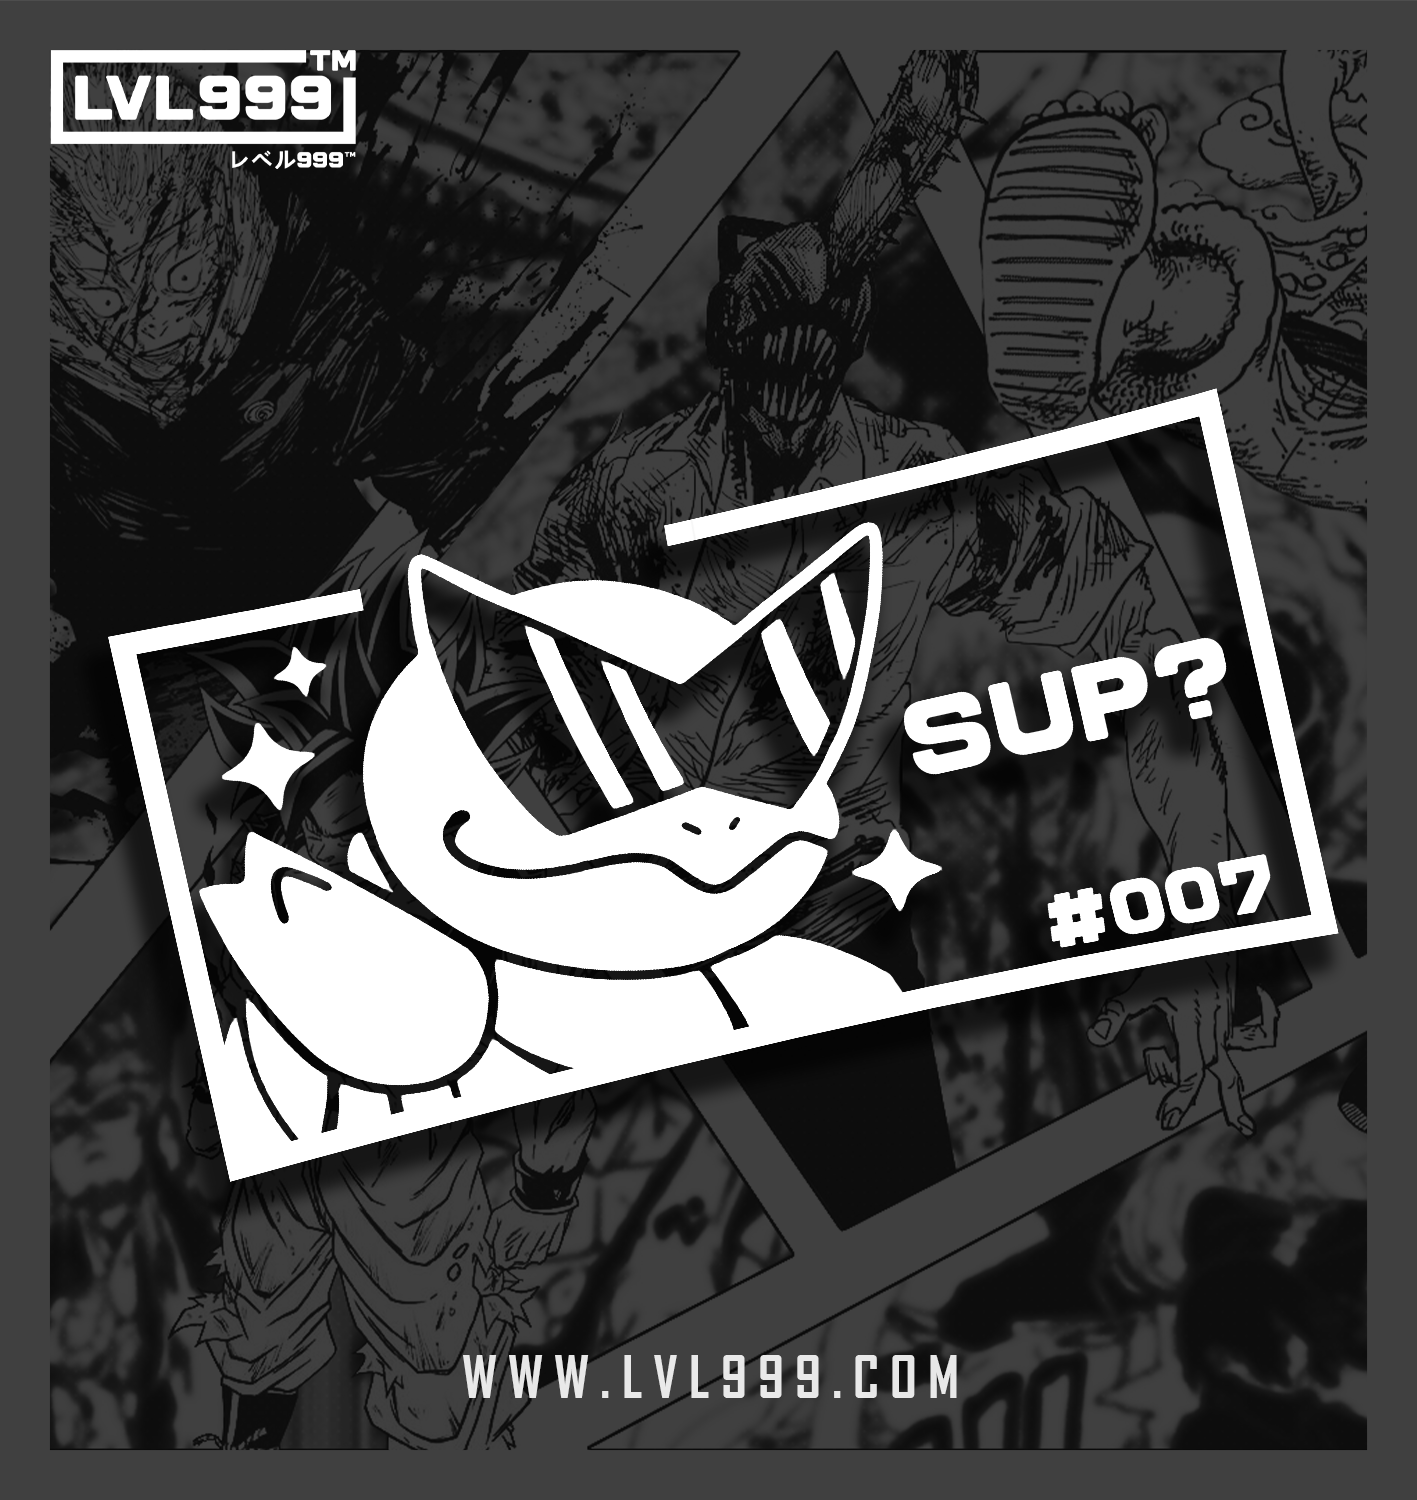 Squirt #007 - Decal - Sup?